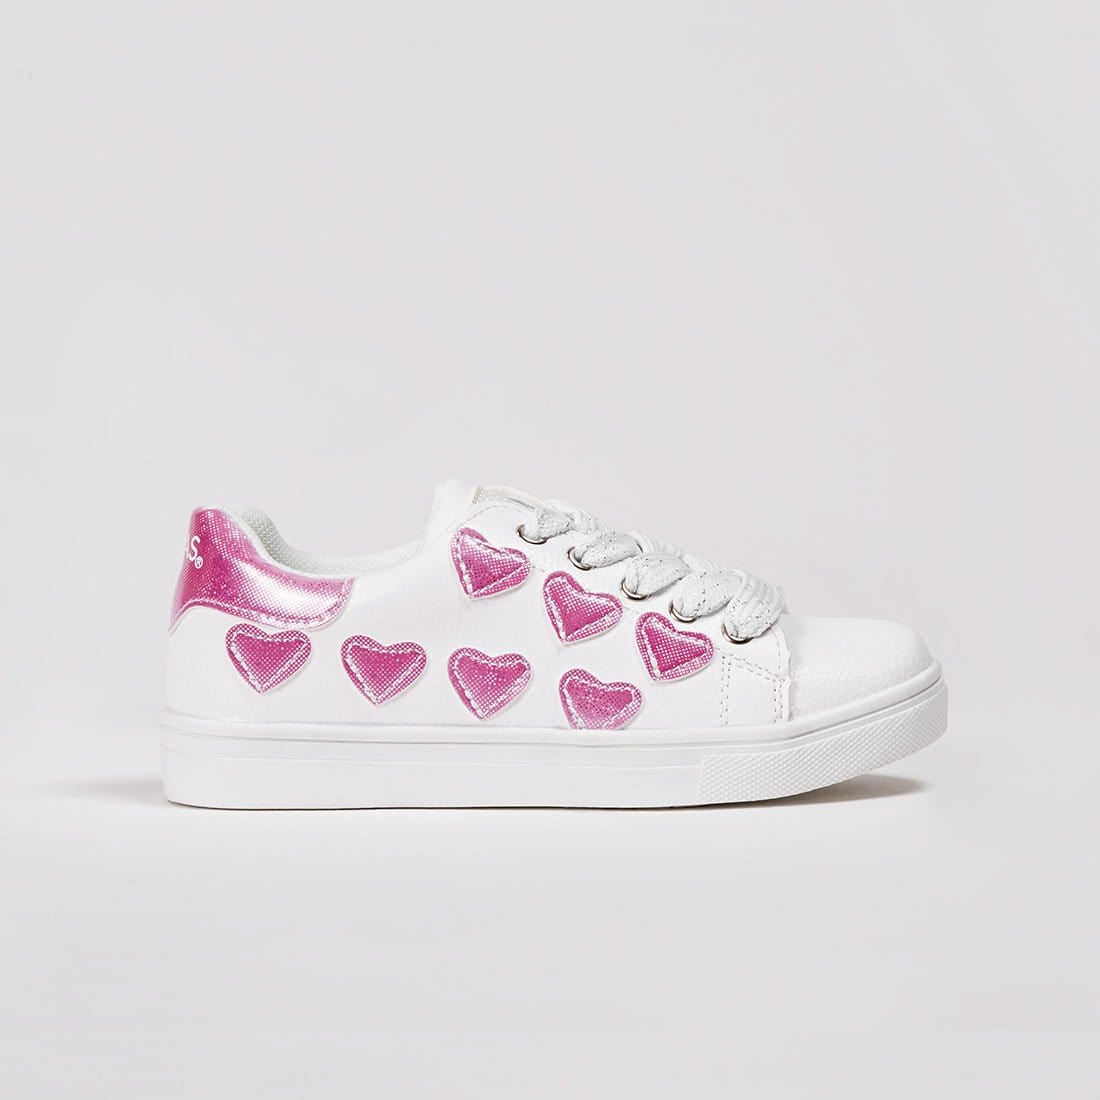 FRESAS CON NATA Shoes Girl's Solar Hearts Colour Changing Sneakers